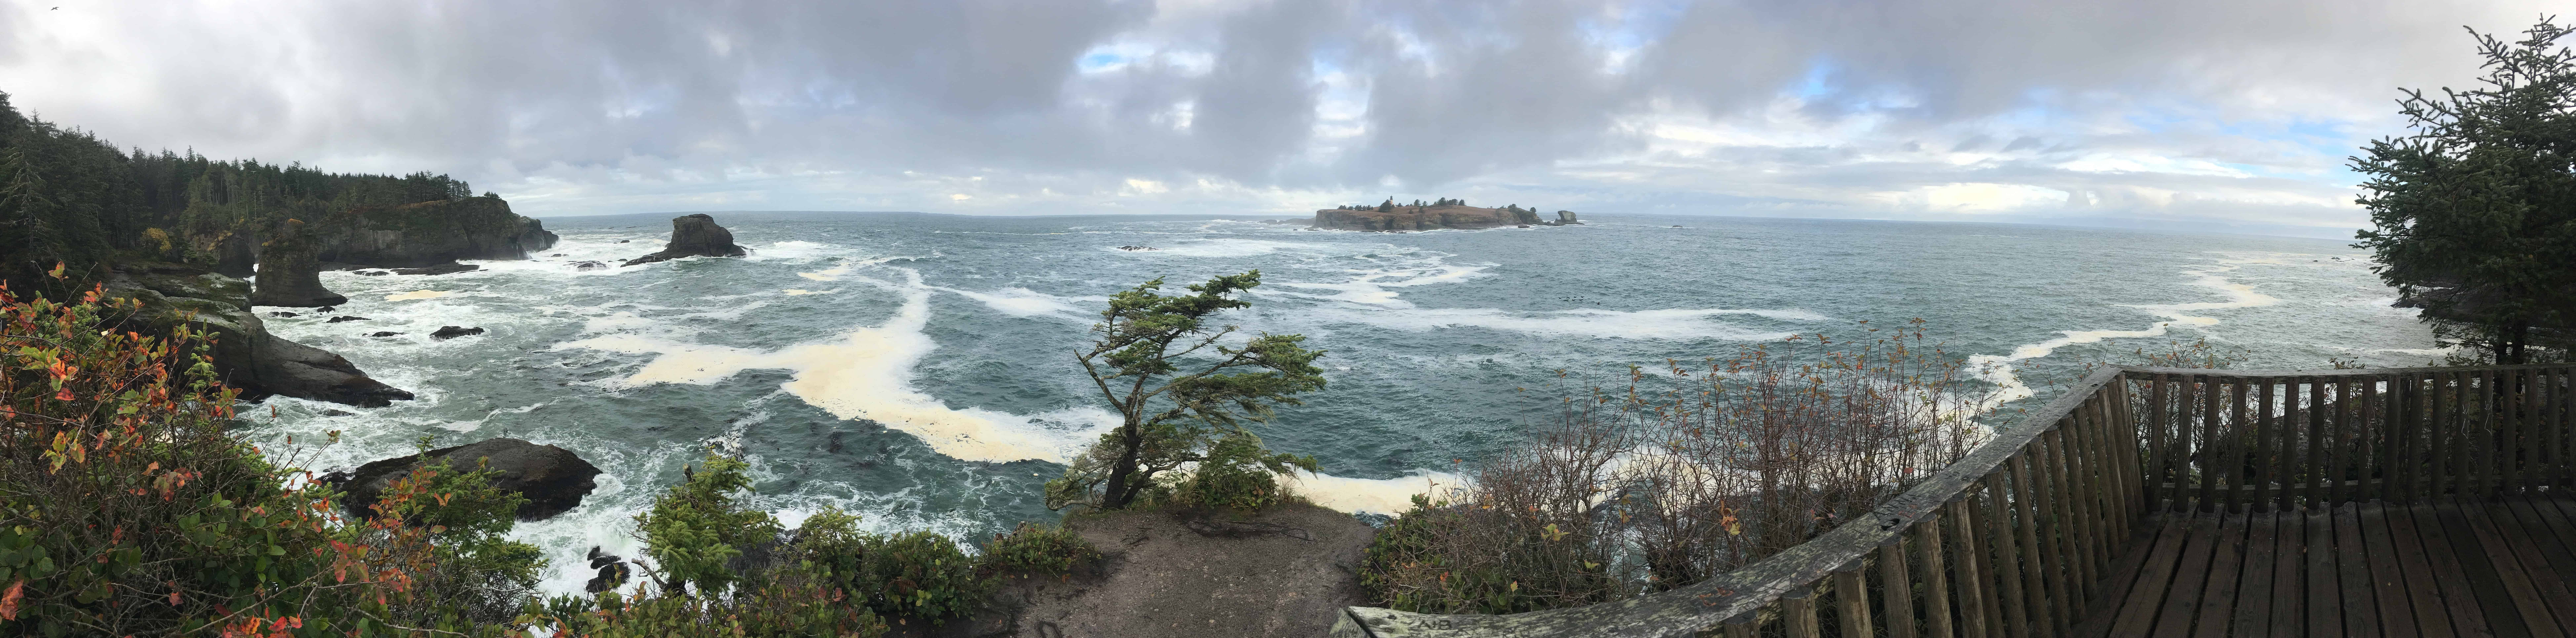 Third viewpoint on the Cape Flattery Trail on the Makah Reservation in Washington